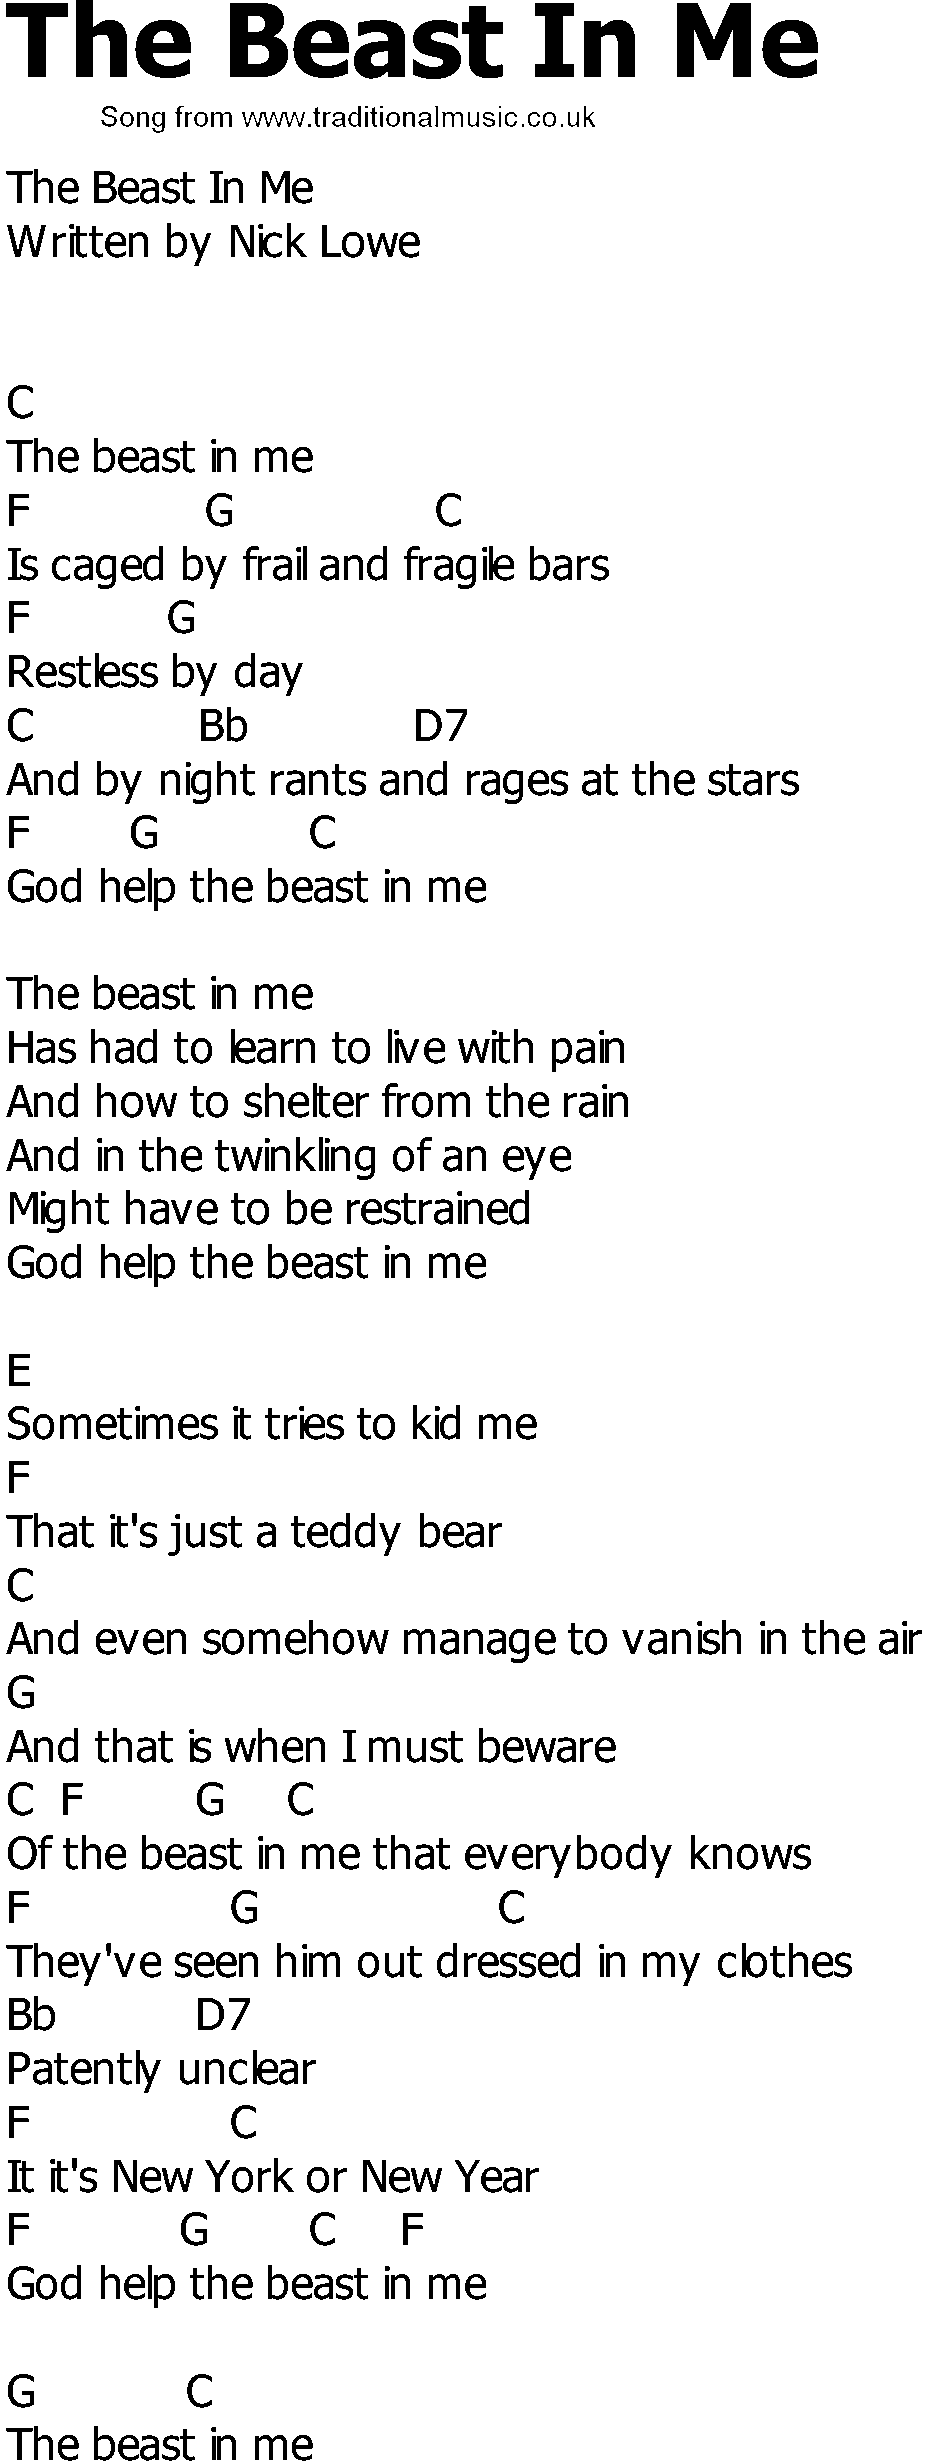 Old Country song lyrics with chords - The Beast In Me